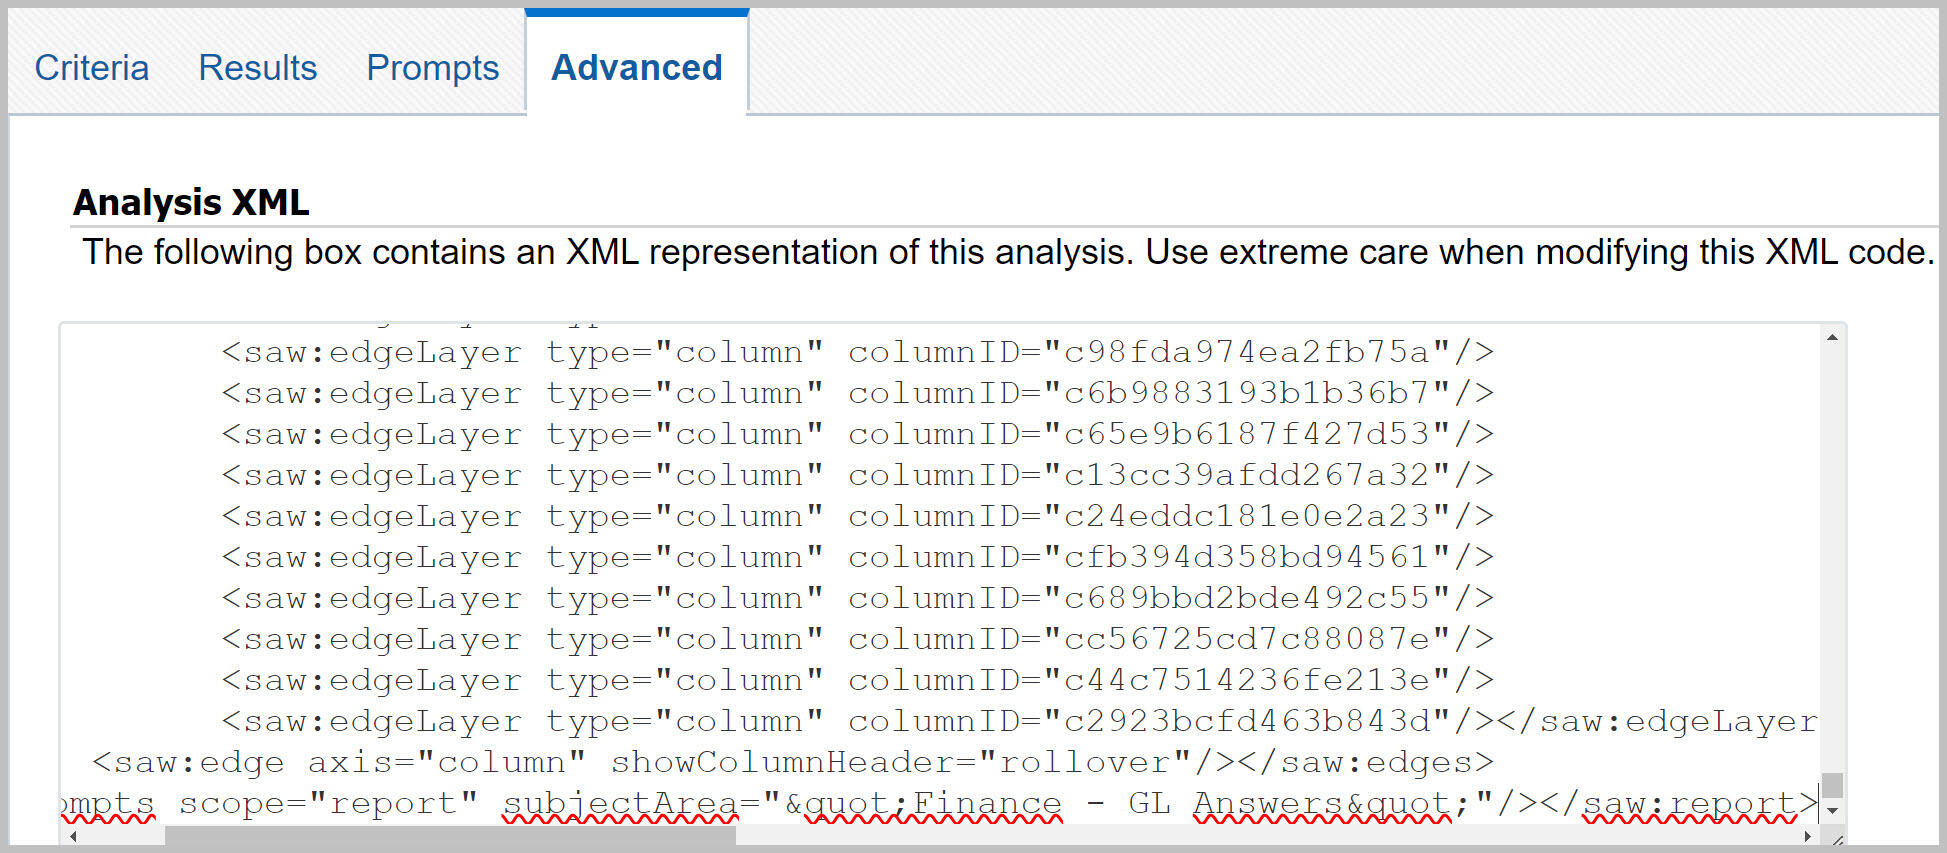 Ad Hoc Editor with text pasted into Analysis XML text box